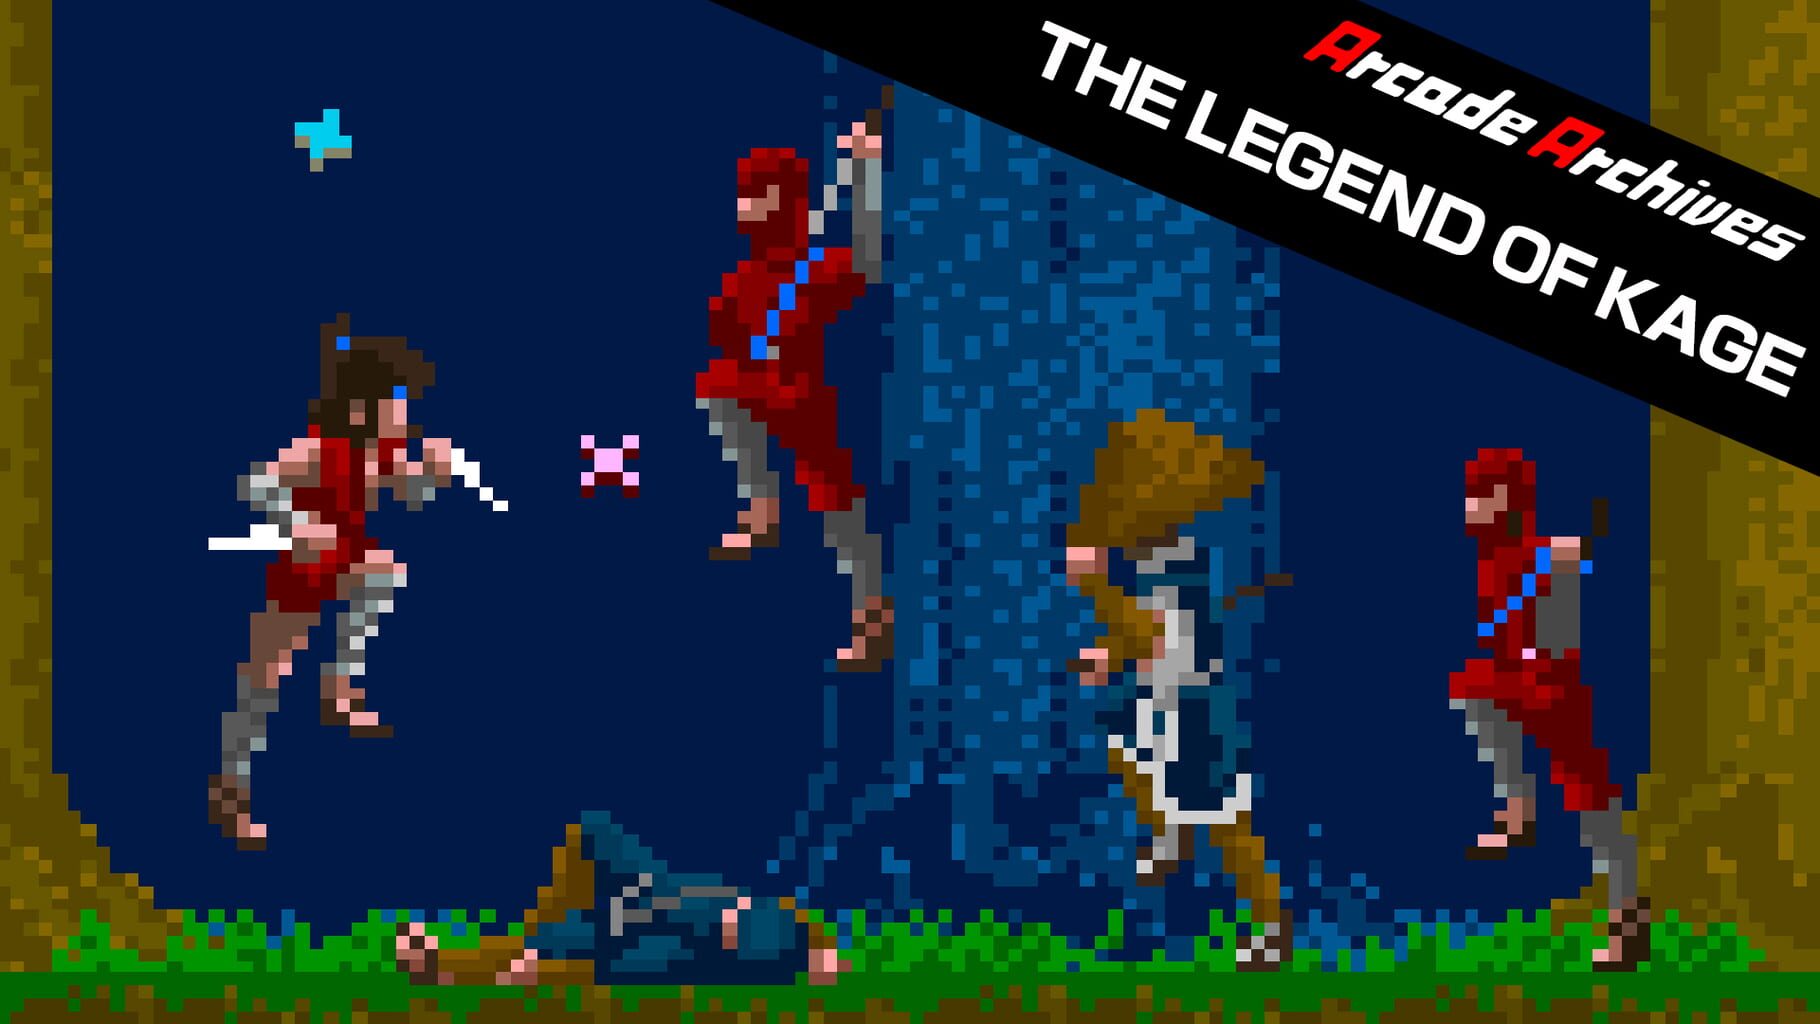 Arcade Archives: The Legend of Kage artwork